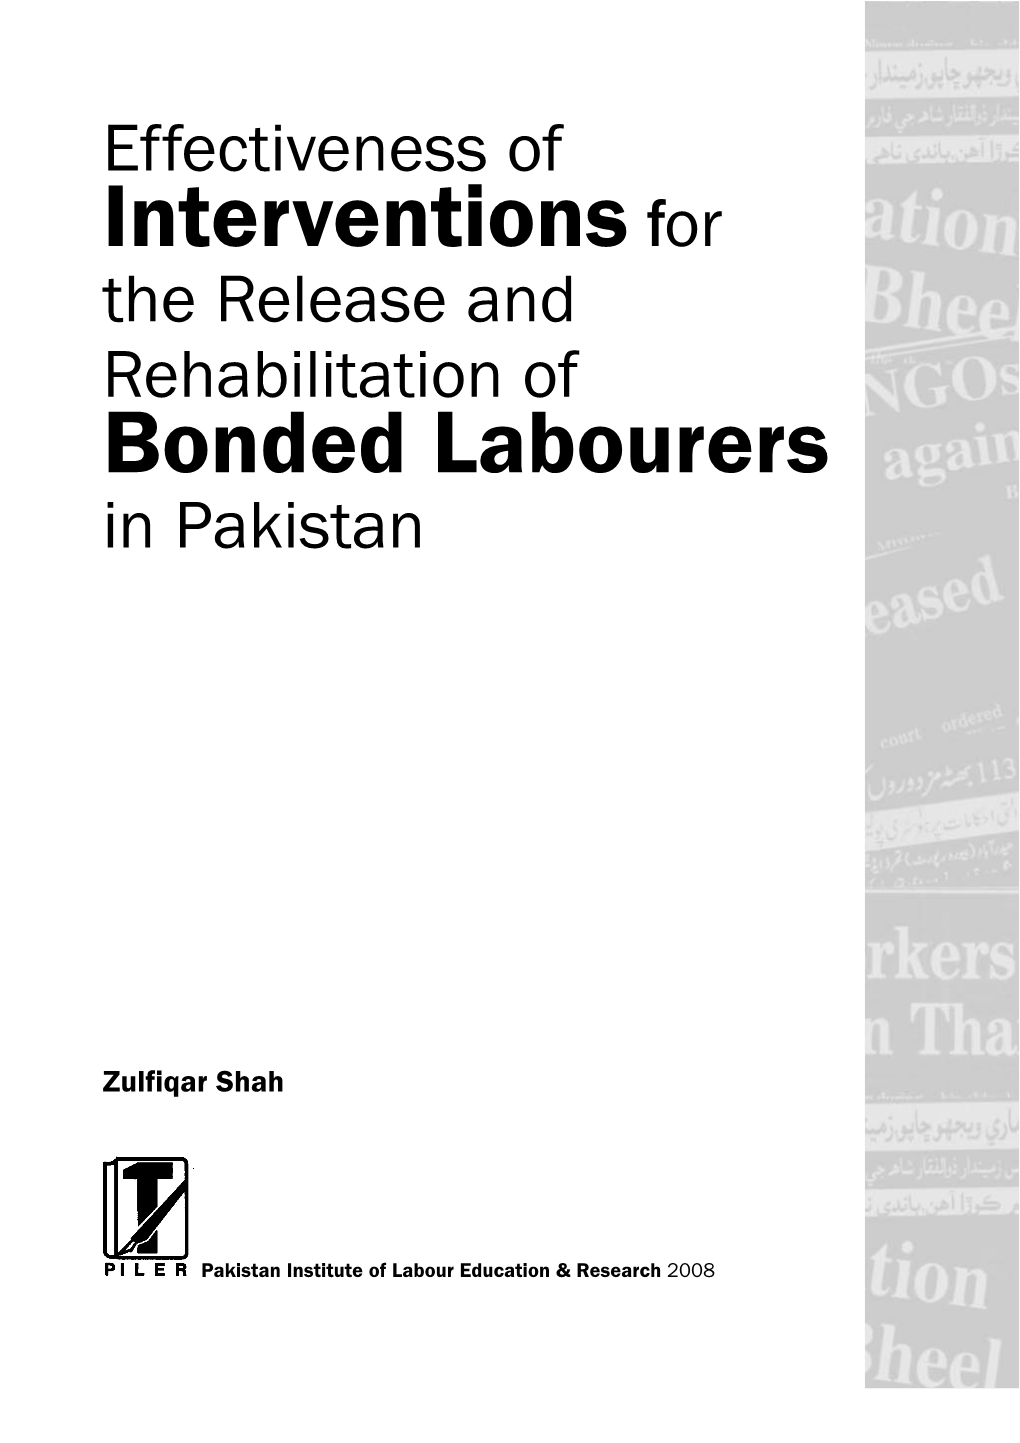 Interventions for Bonded Labourers